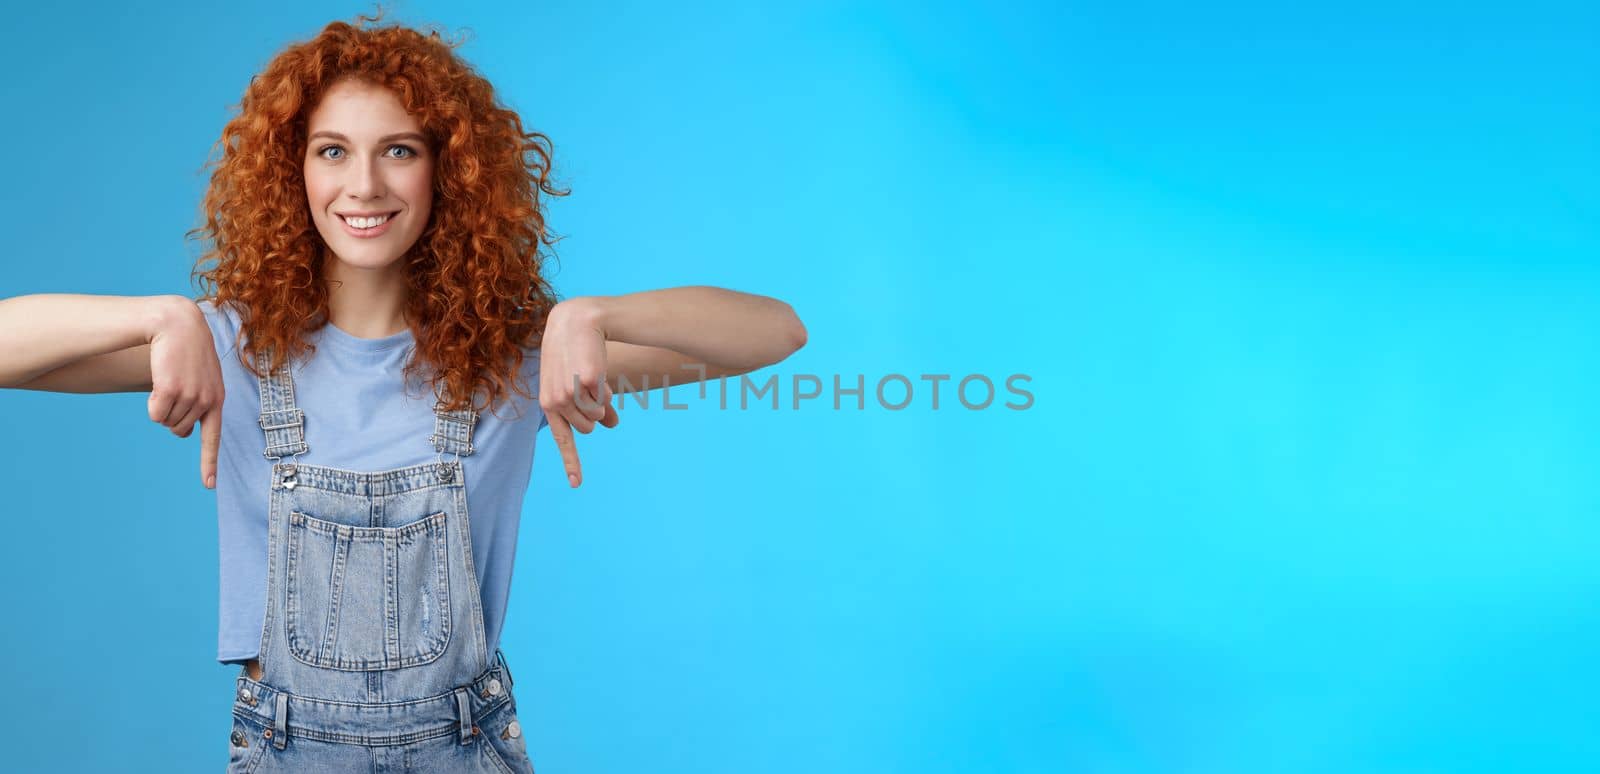 Lifestyle. Charismatic sassy flirty redhead daring ginger girl curly haircut pointing down index fingers smiling broadly enthusiastic explore new store pointing promo like cool advertisement blue background.